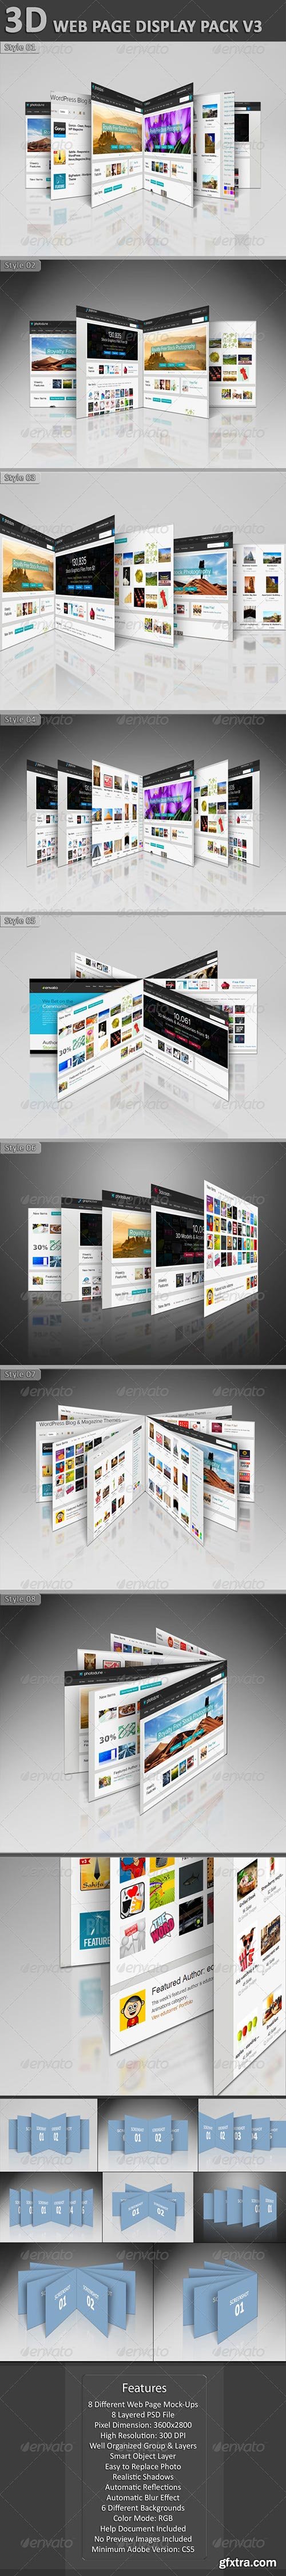 GraphicRiver - 3D Web Page Display Pack V3